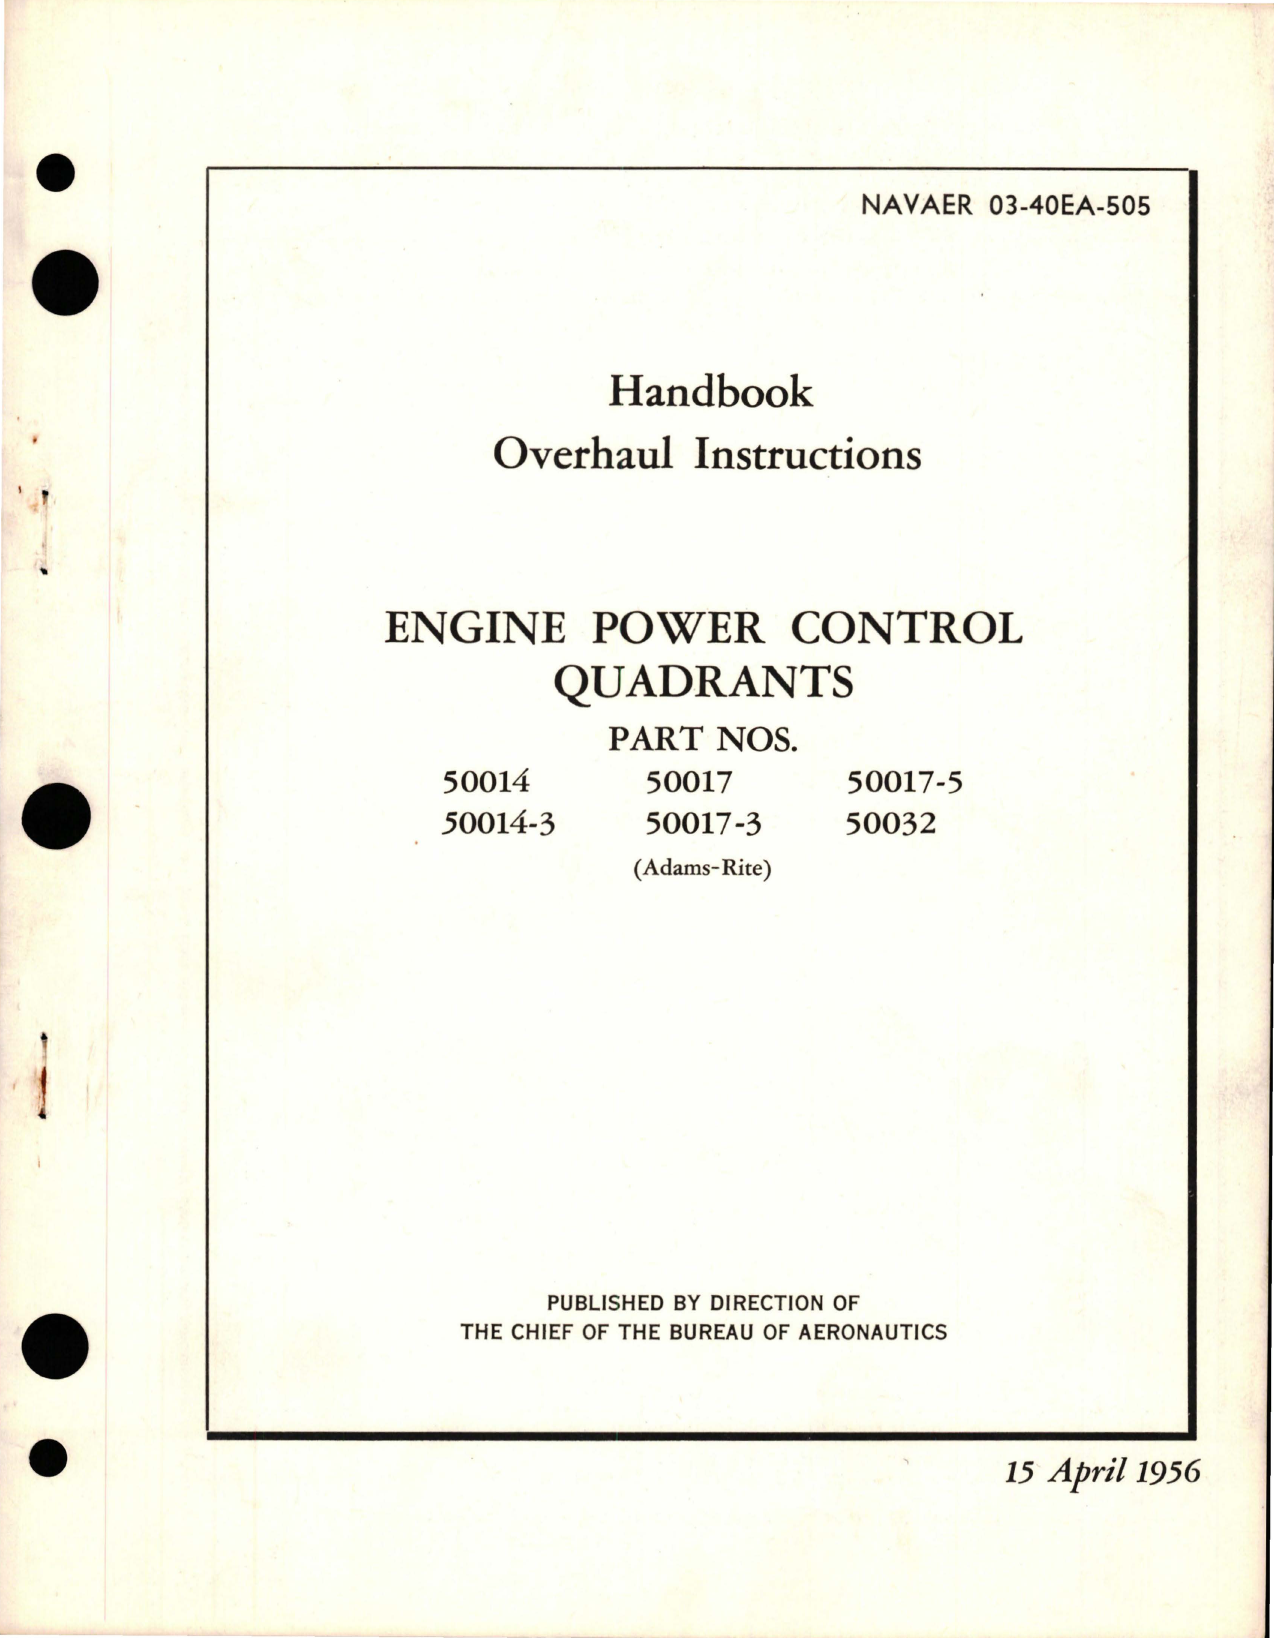 Sample page 1 from AirCorps Library document: Overhaul Instructions for Engine Power Control Quadrants - Parts 50014, 50014-3, 50017, 50017-3, 50017-5, and 50032 